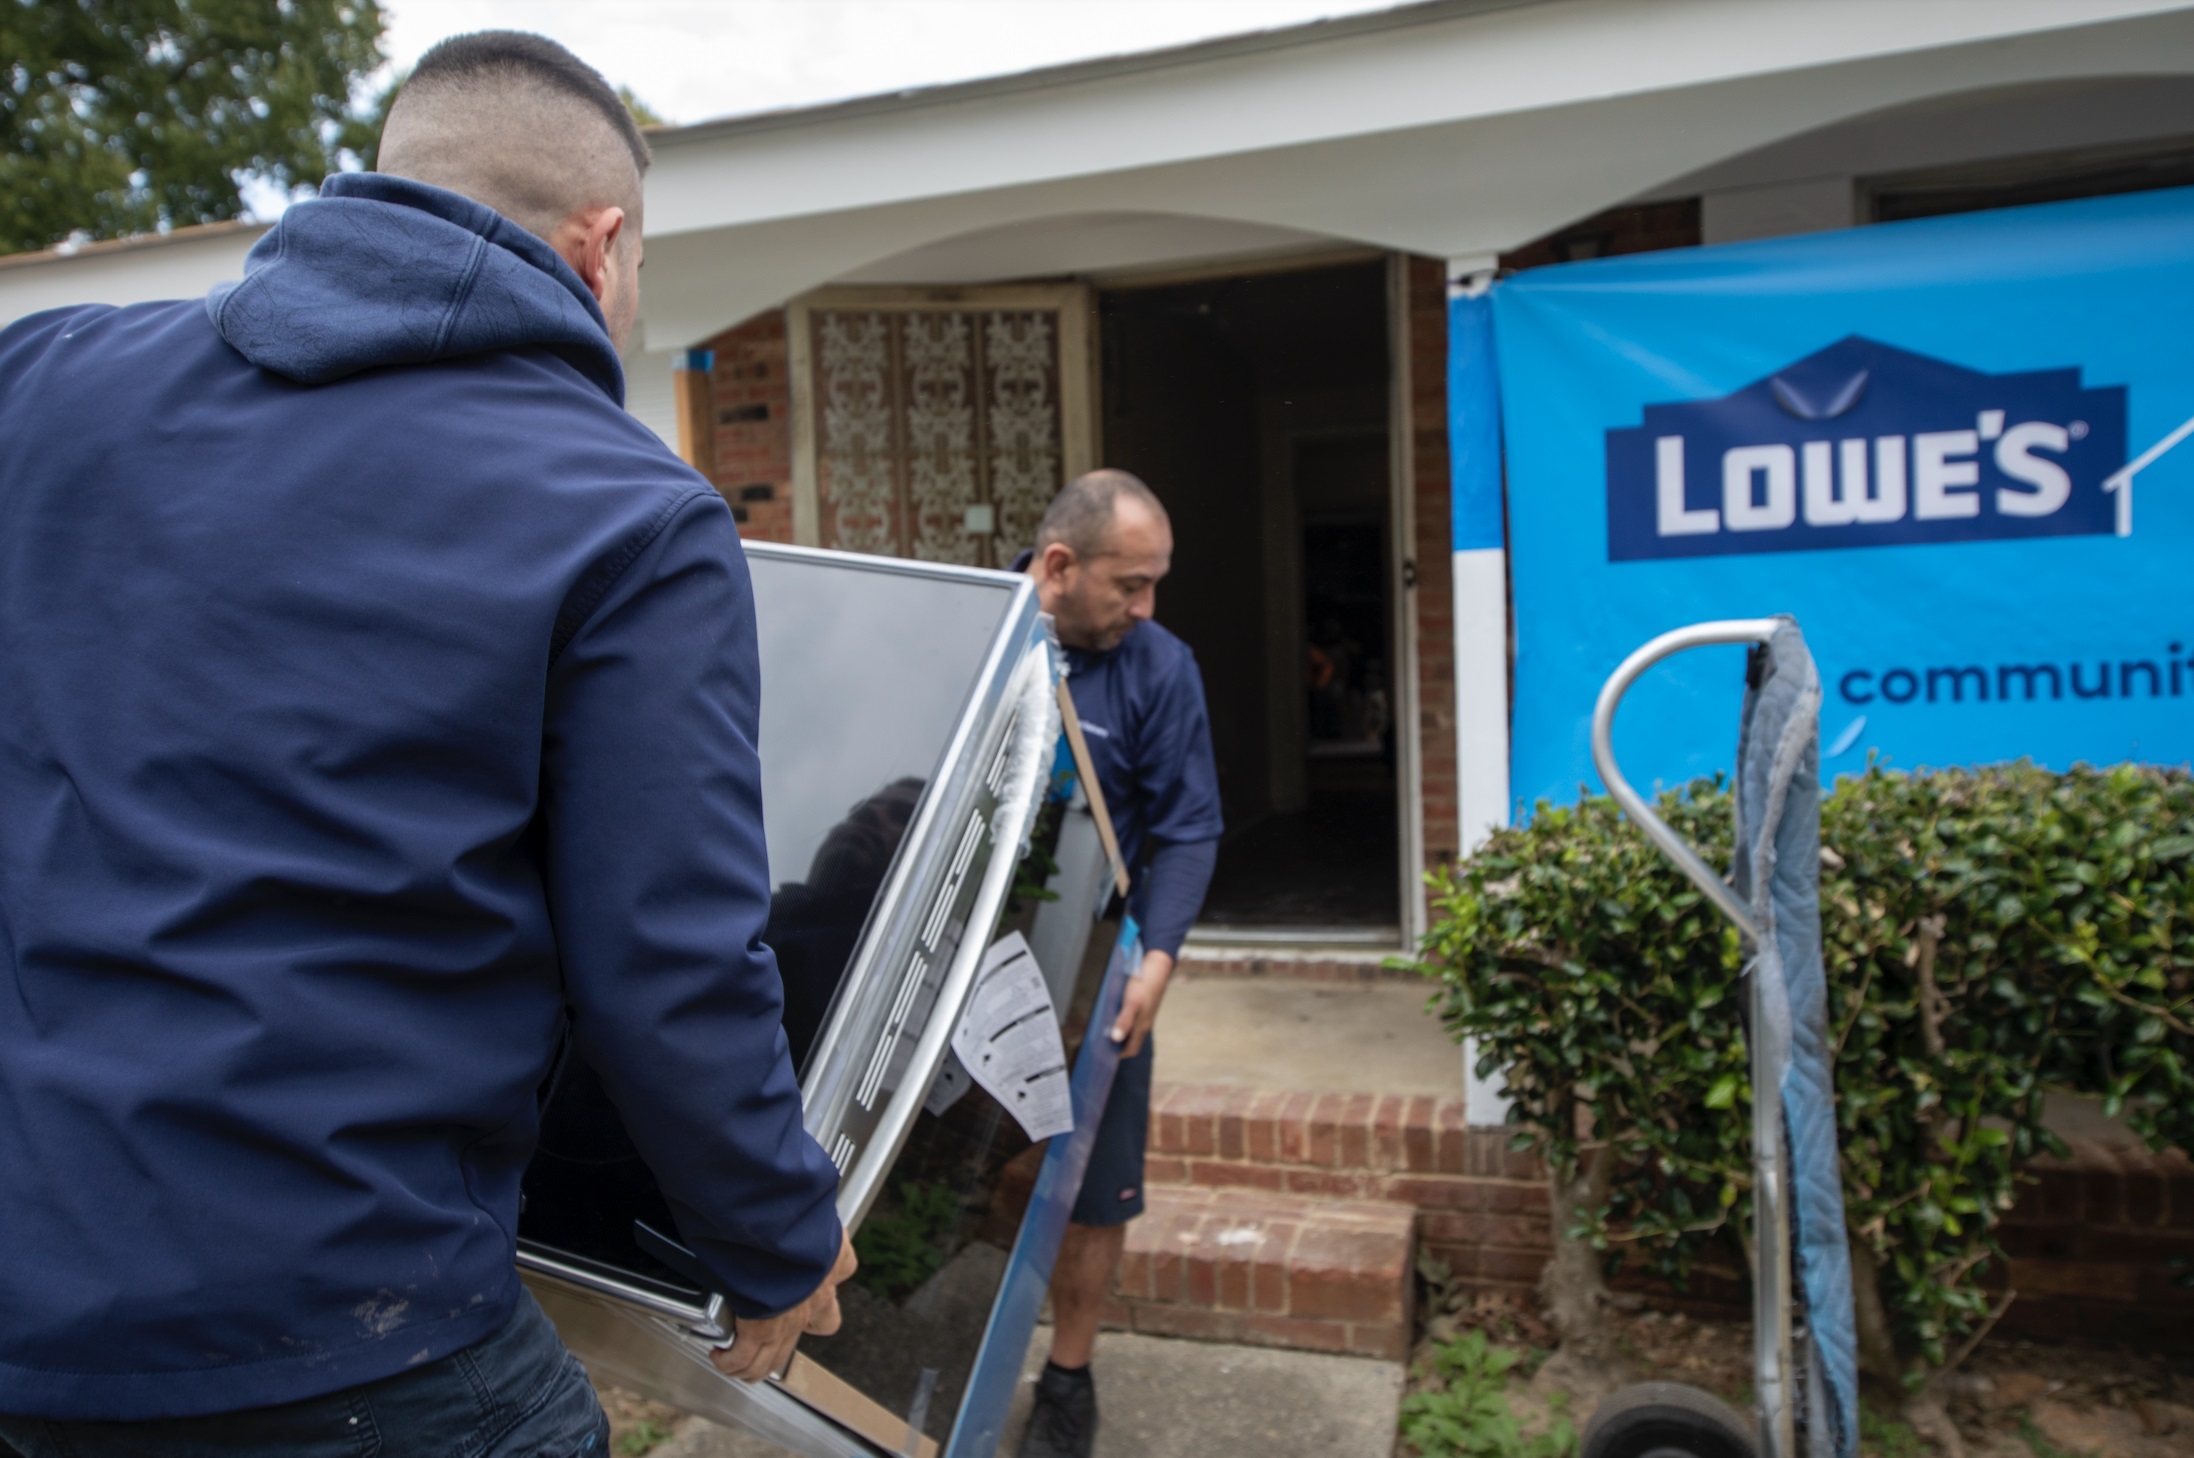 Volunteers carrying the donated LG appliance inside house